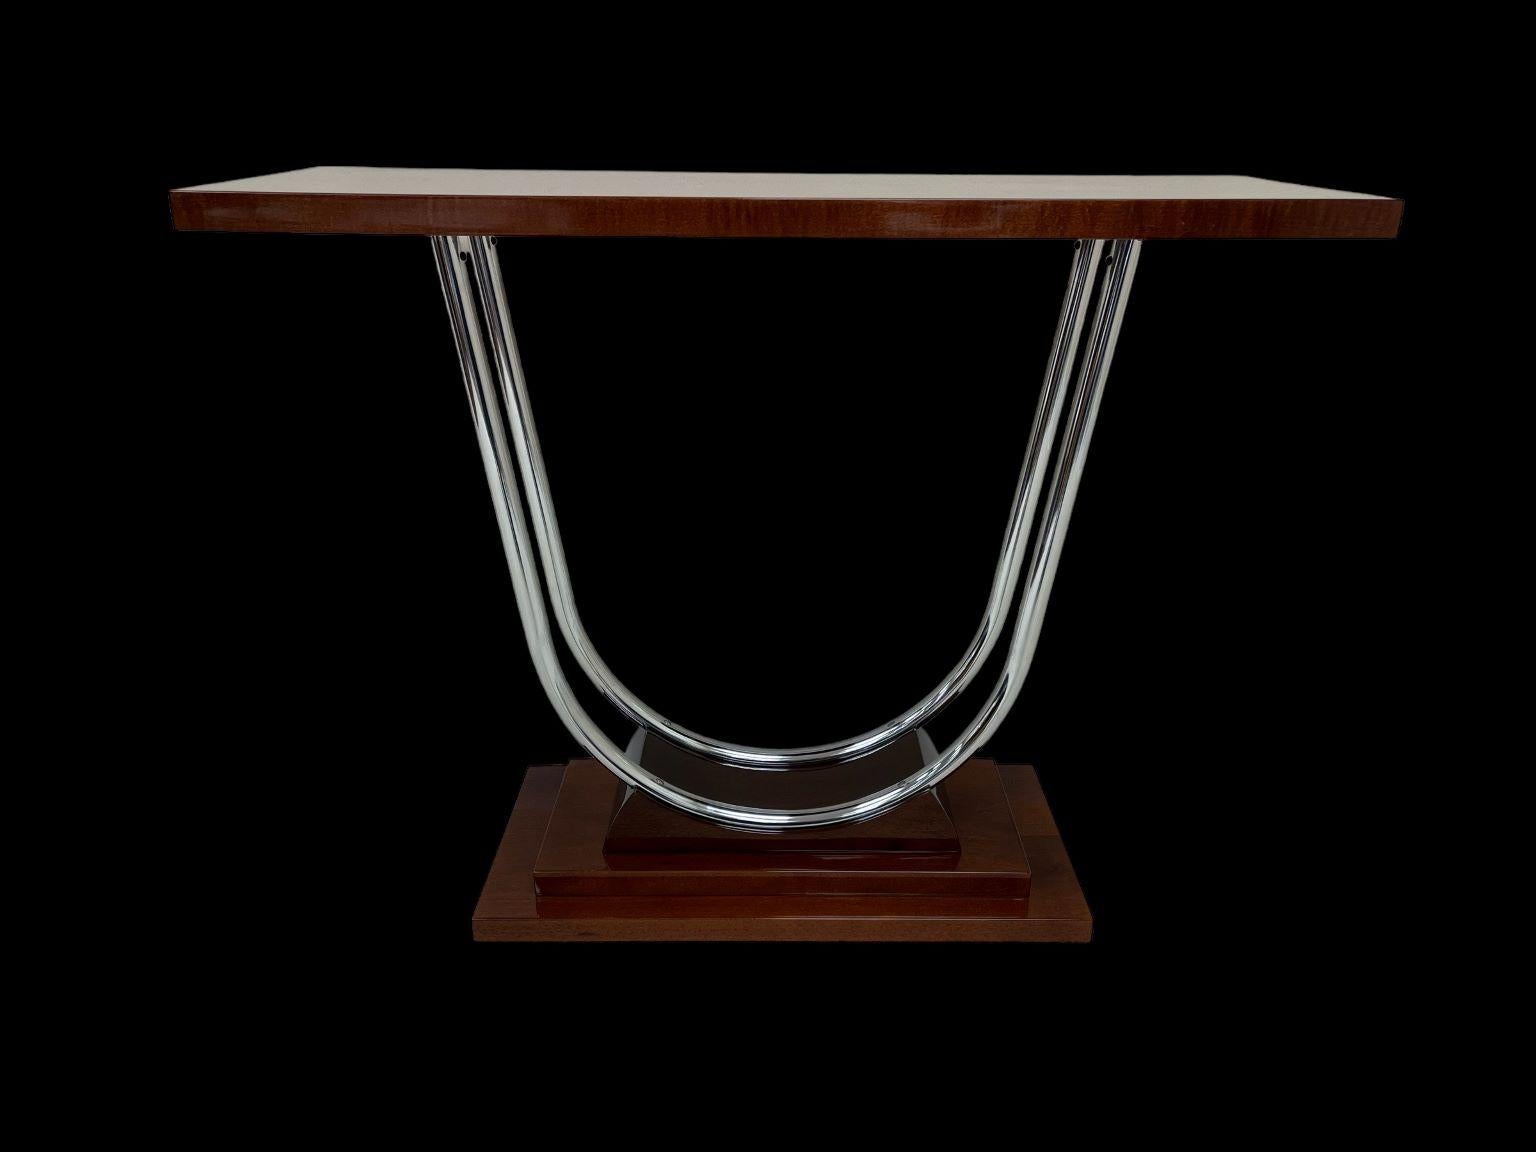 Polished Spectacular Streamline Moderne Art Deco Chrome Console Table American C.1930 For Sale